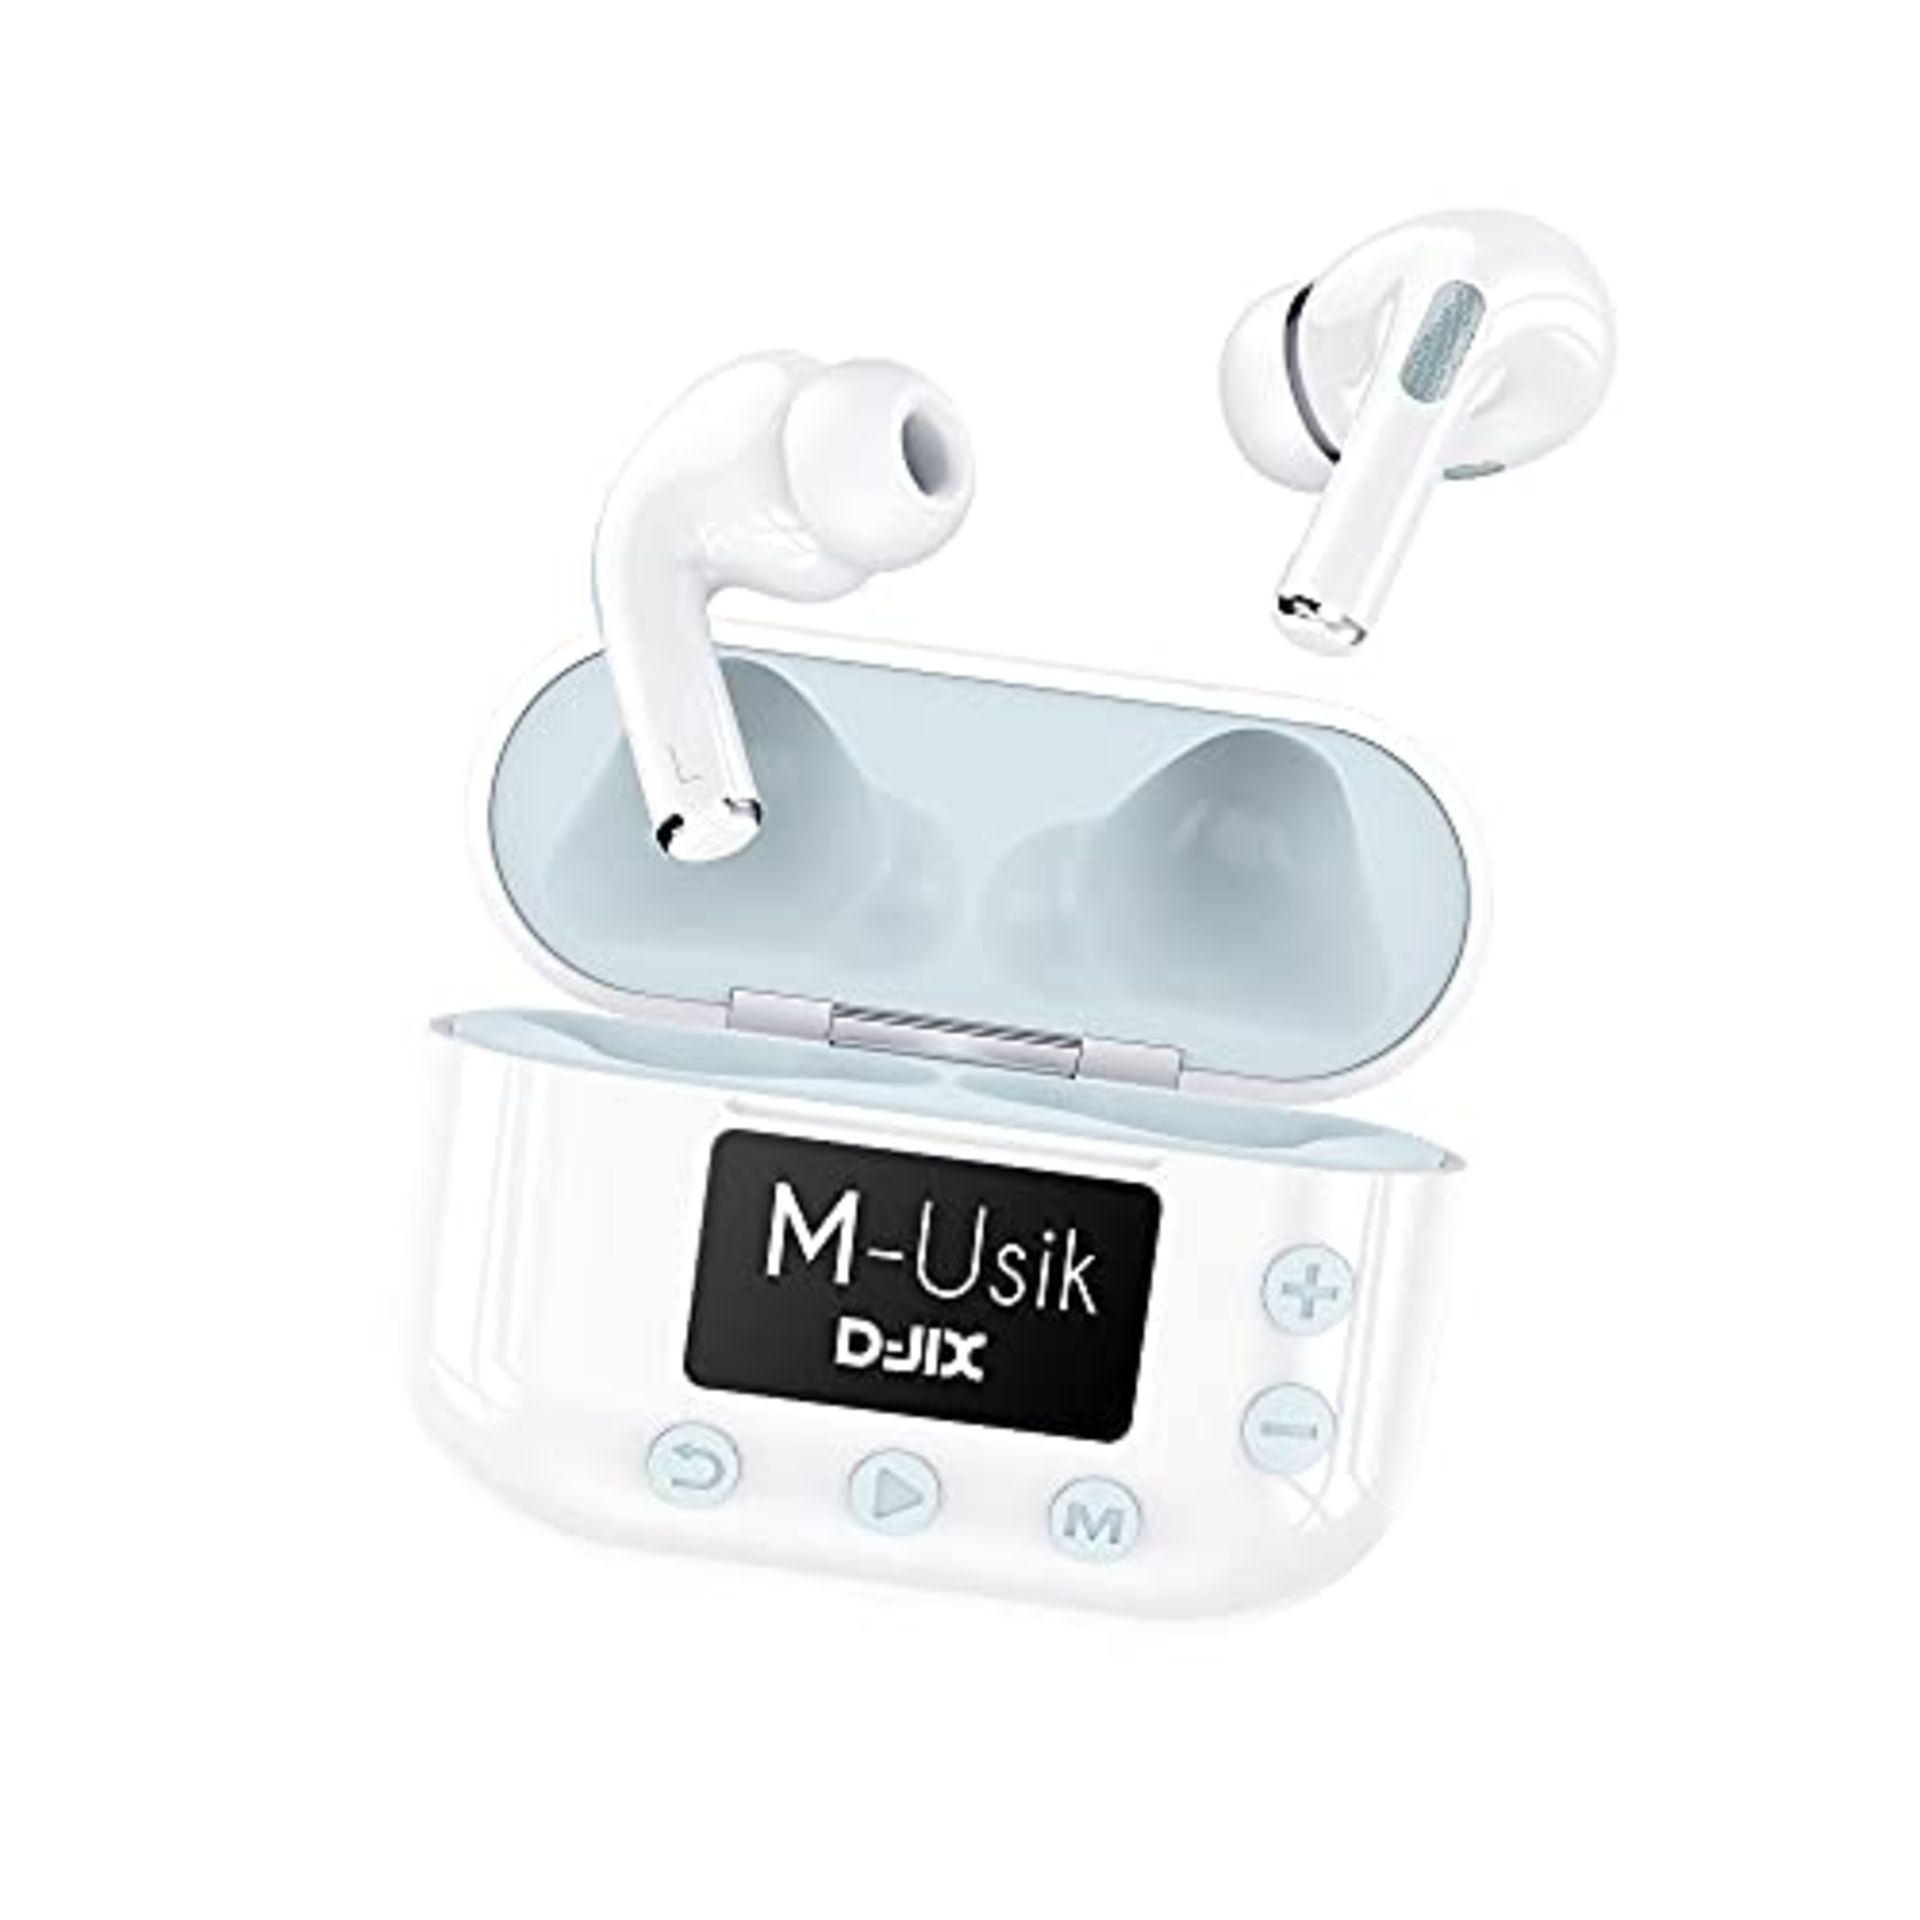 D-Jix - Wireless Bluetooth Earphones M-Usik Player - 2 in 1 Device Wireless Bluetooth - Image 4 of 6